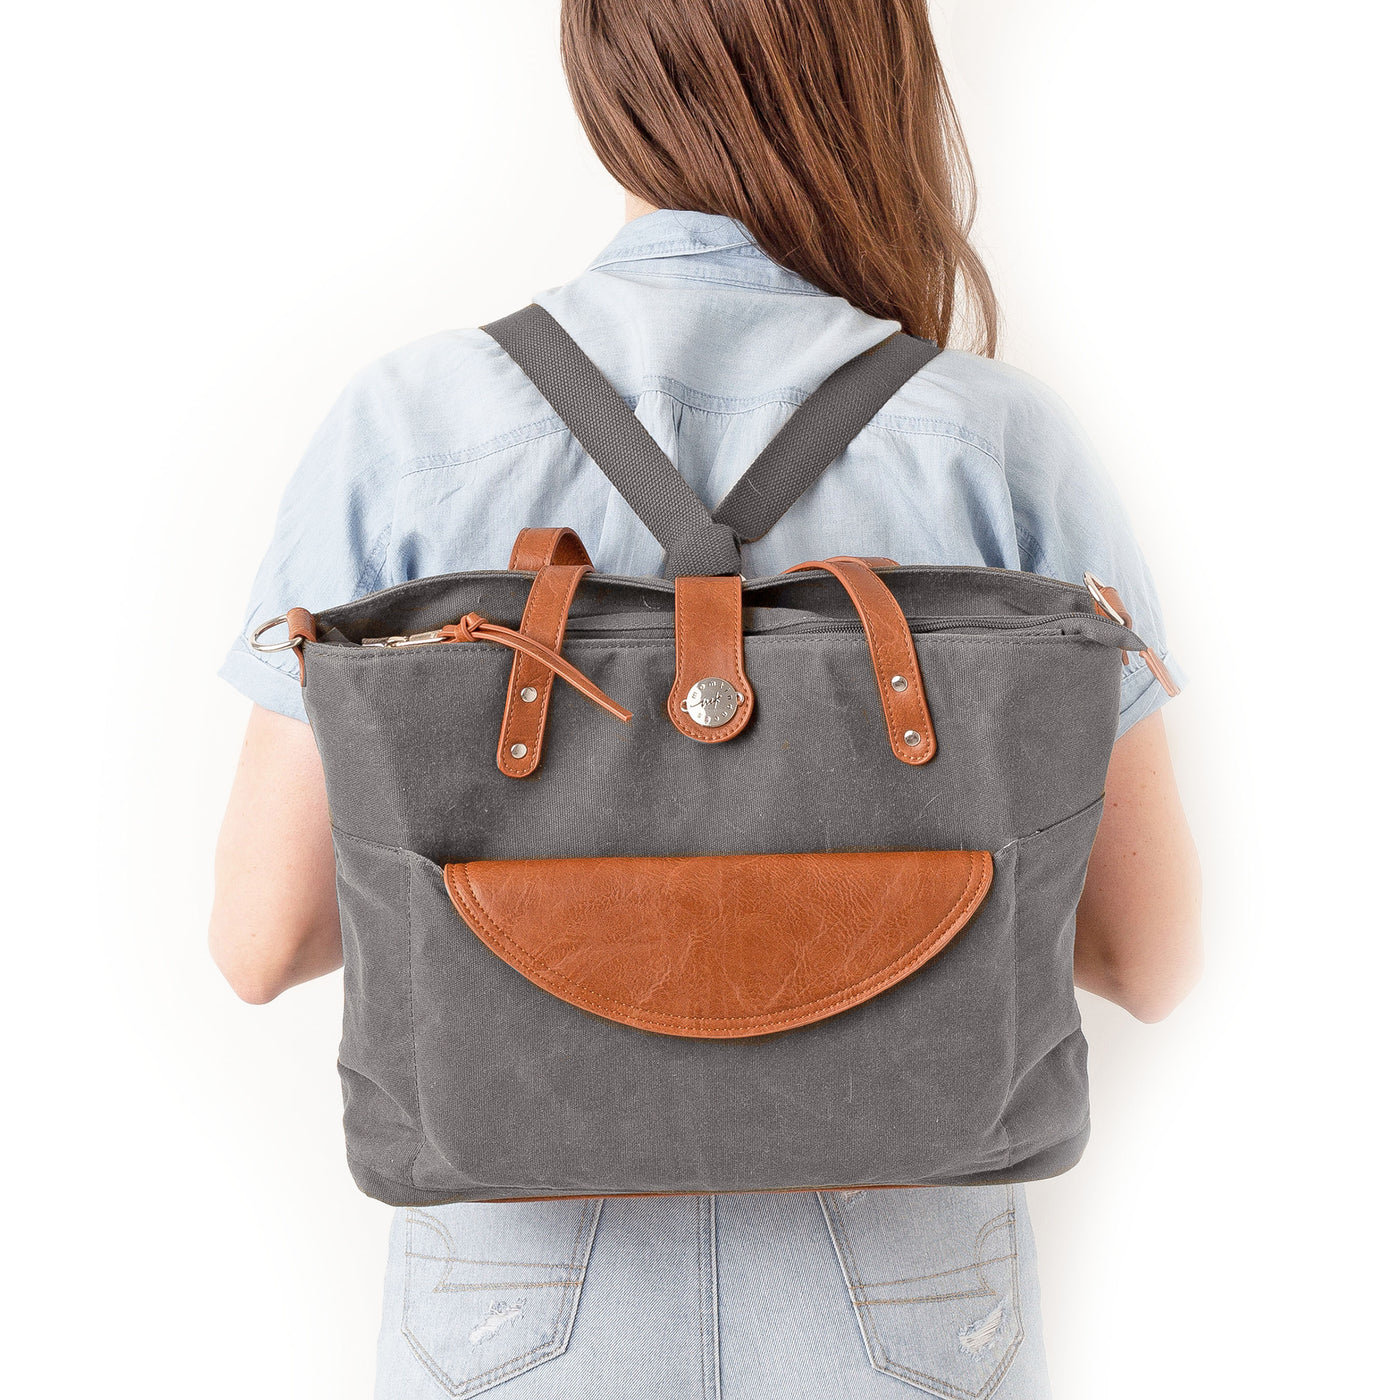 A mom in blue blouse and jeans shown from behind in front of a white background wearing a grey waxed canvas backpack with brown vegan leather accents.